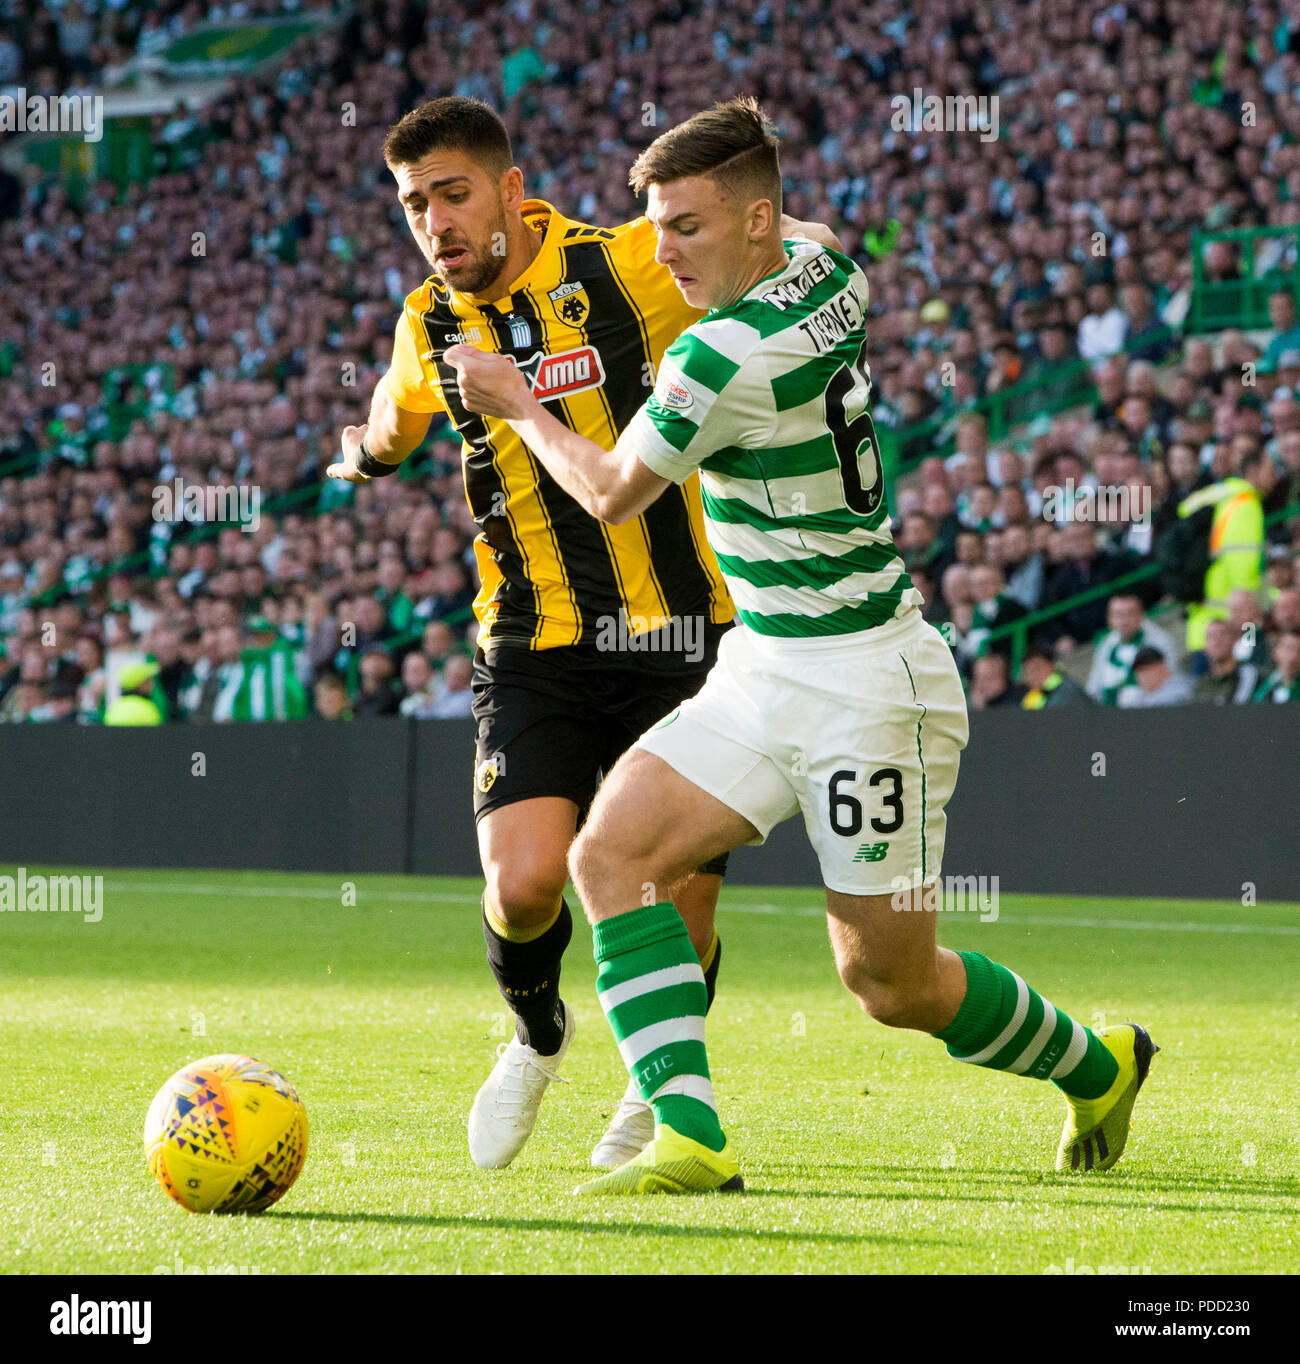 AEK Athens Victor Klonaridis (left) and Celtic's Kieran Tierney (right)  during the UEFA Champions League third qualifying round, first leg match at  Celtic Park, Glasgow Stock Photo - Alamy